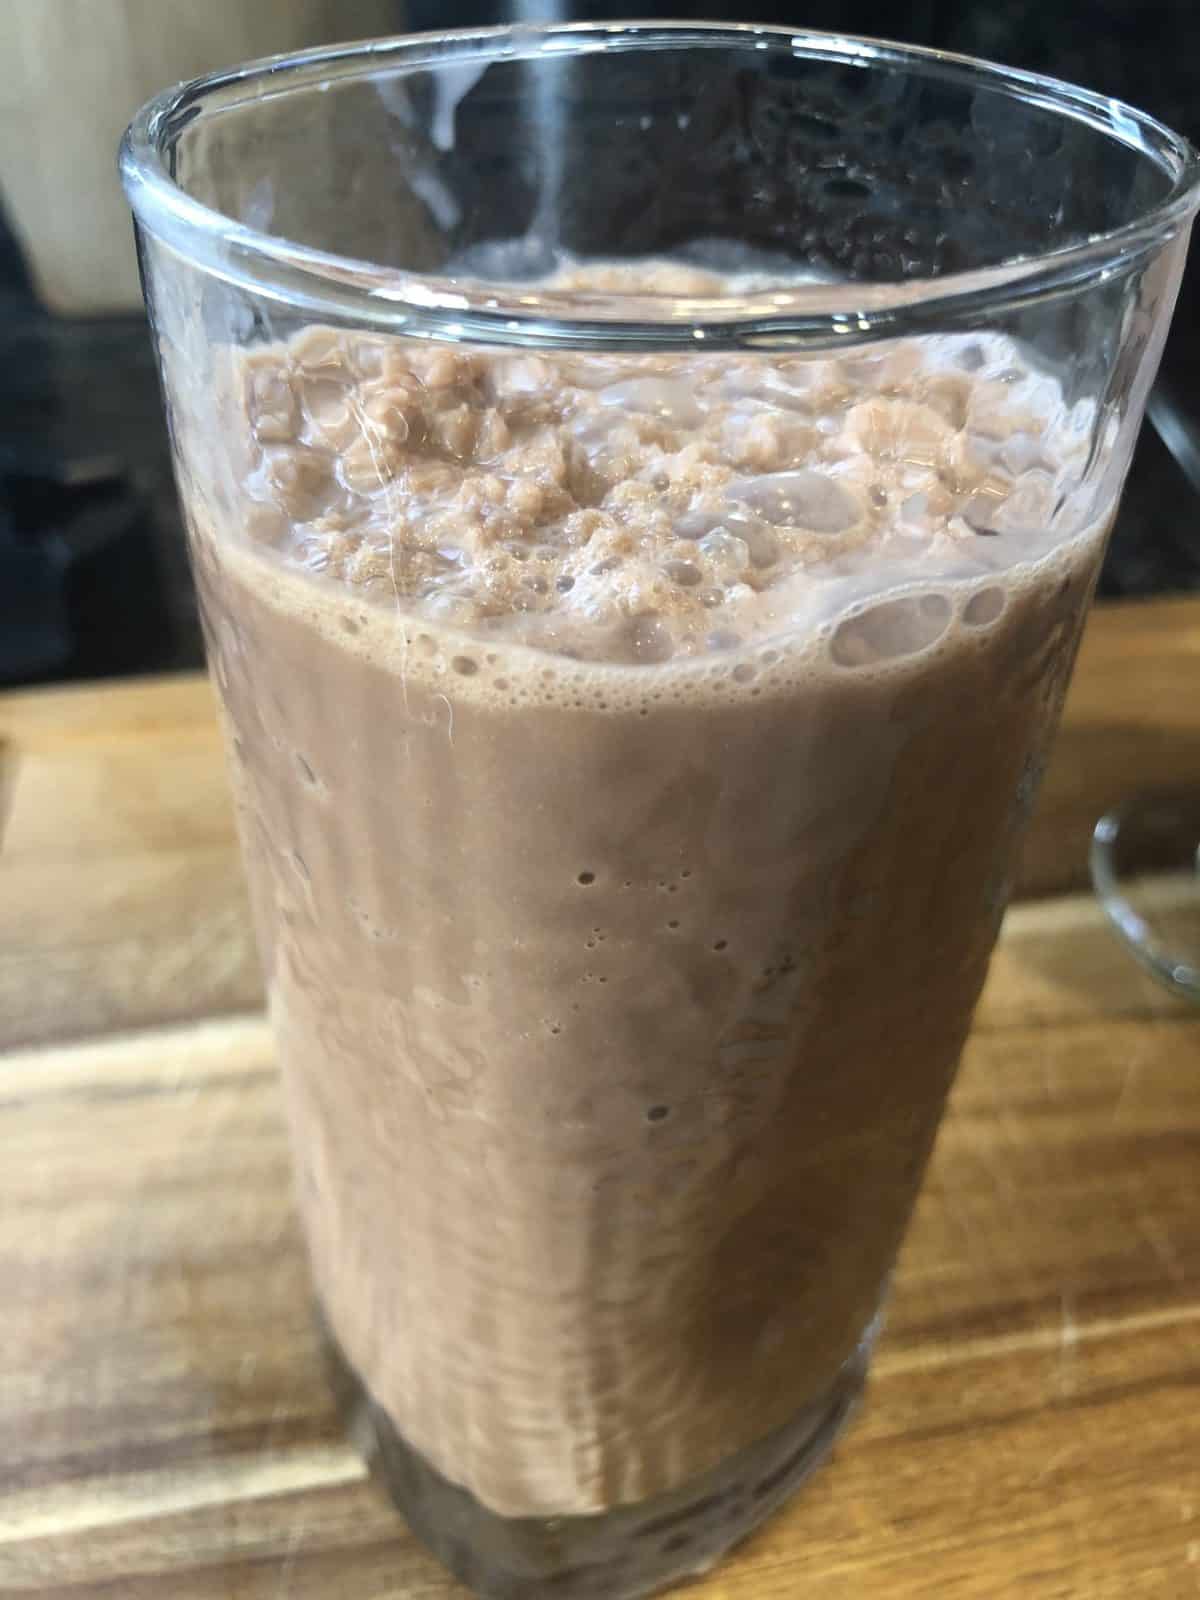 Wendy's Copycat Low Carb-Low Calorie Chocolate Frosty in a clear glass on a wooden table